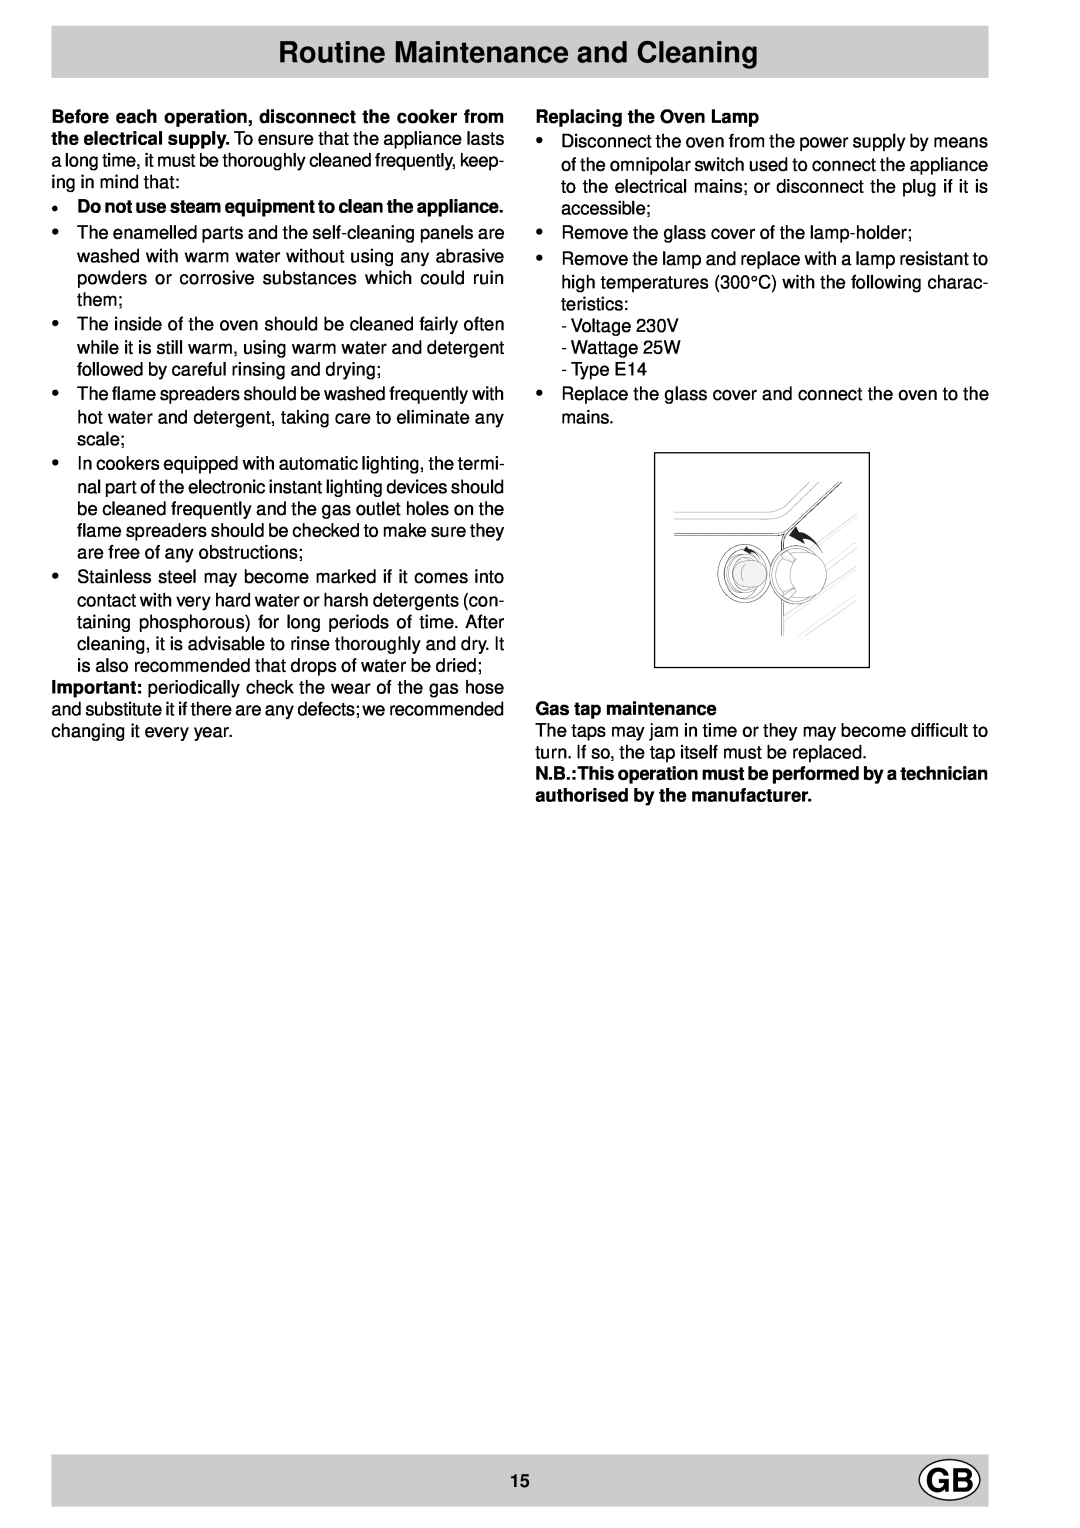 Indesit K6G520/G, K6G52/G manual Routine Maintenance and Cleaning, · Do not use steam equipment to clean the appliance 